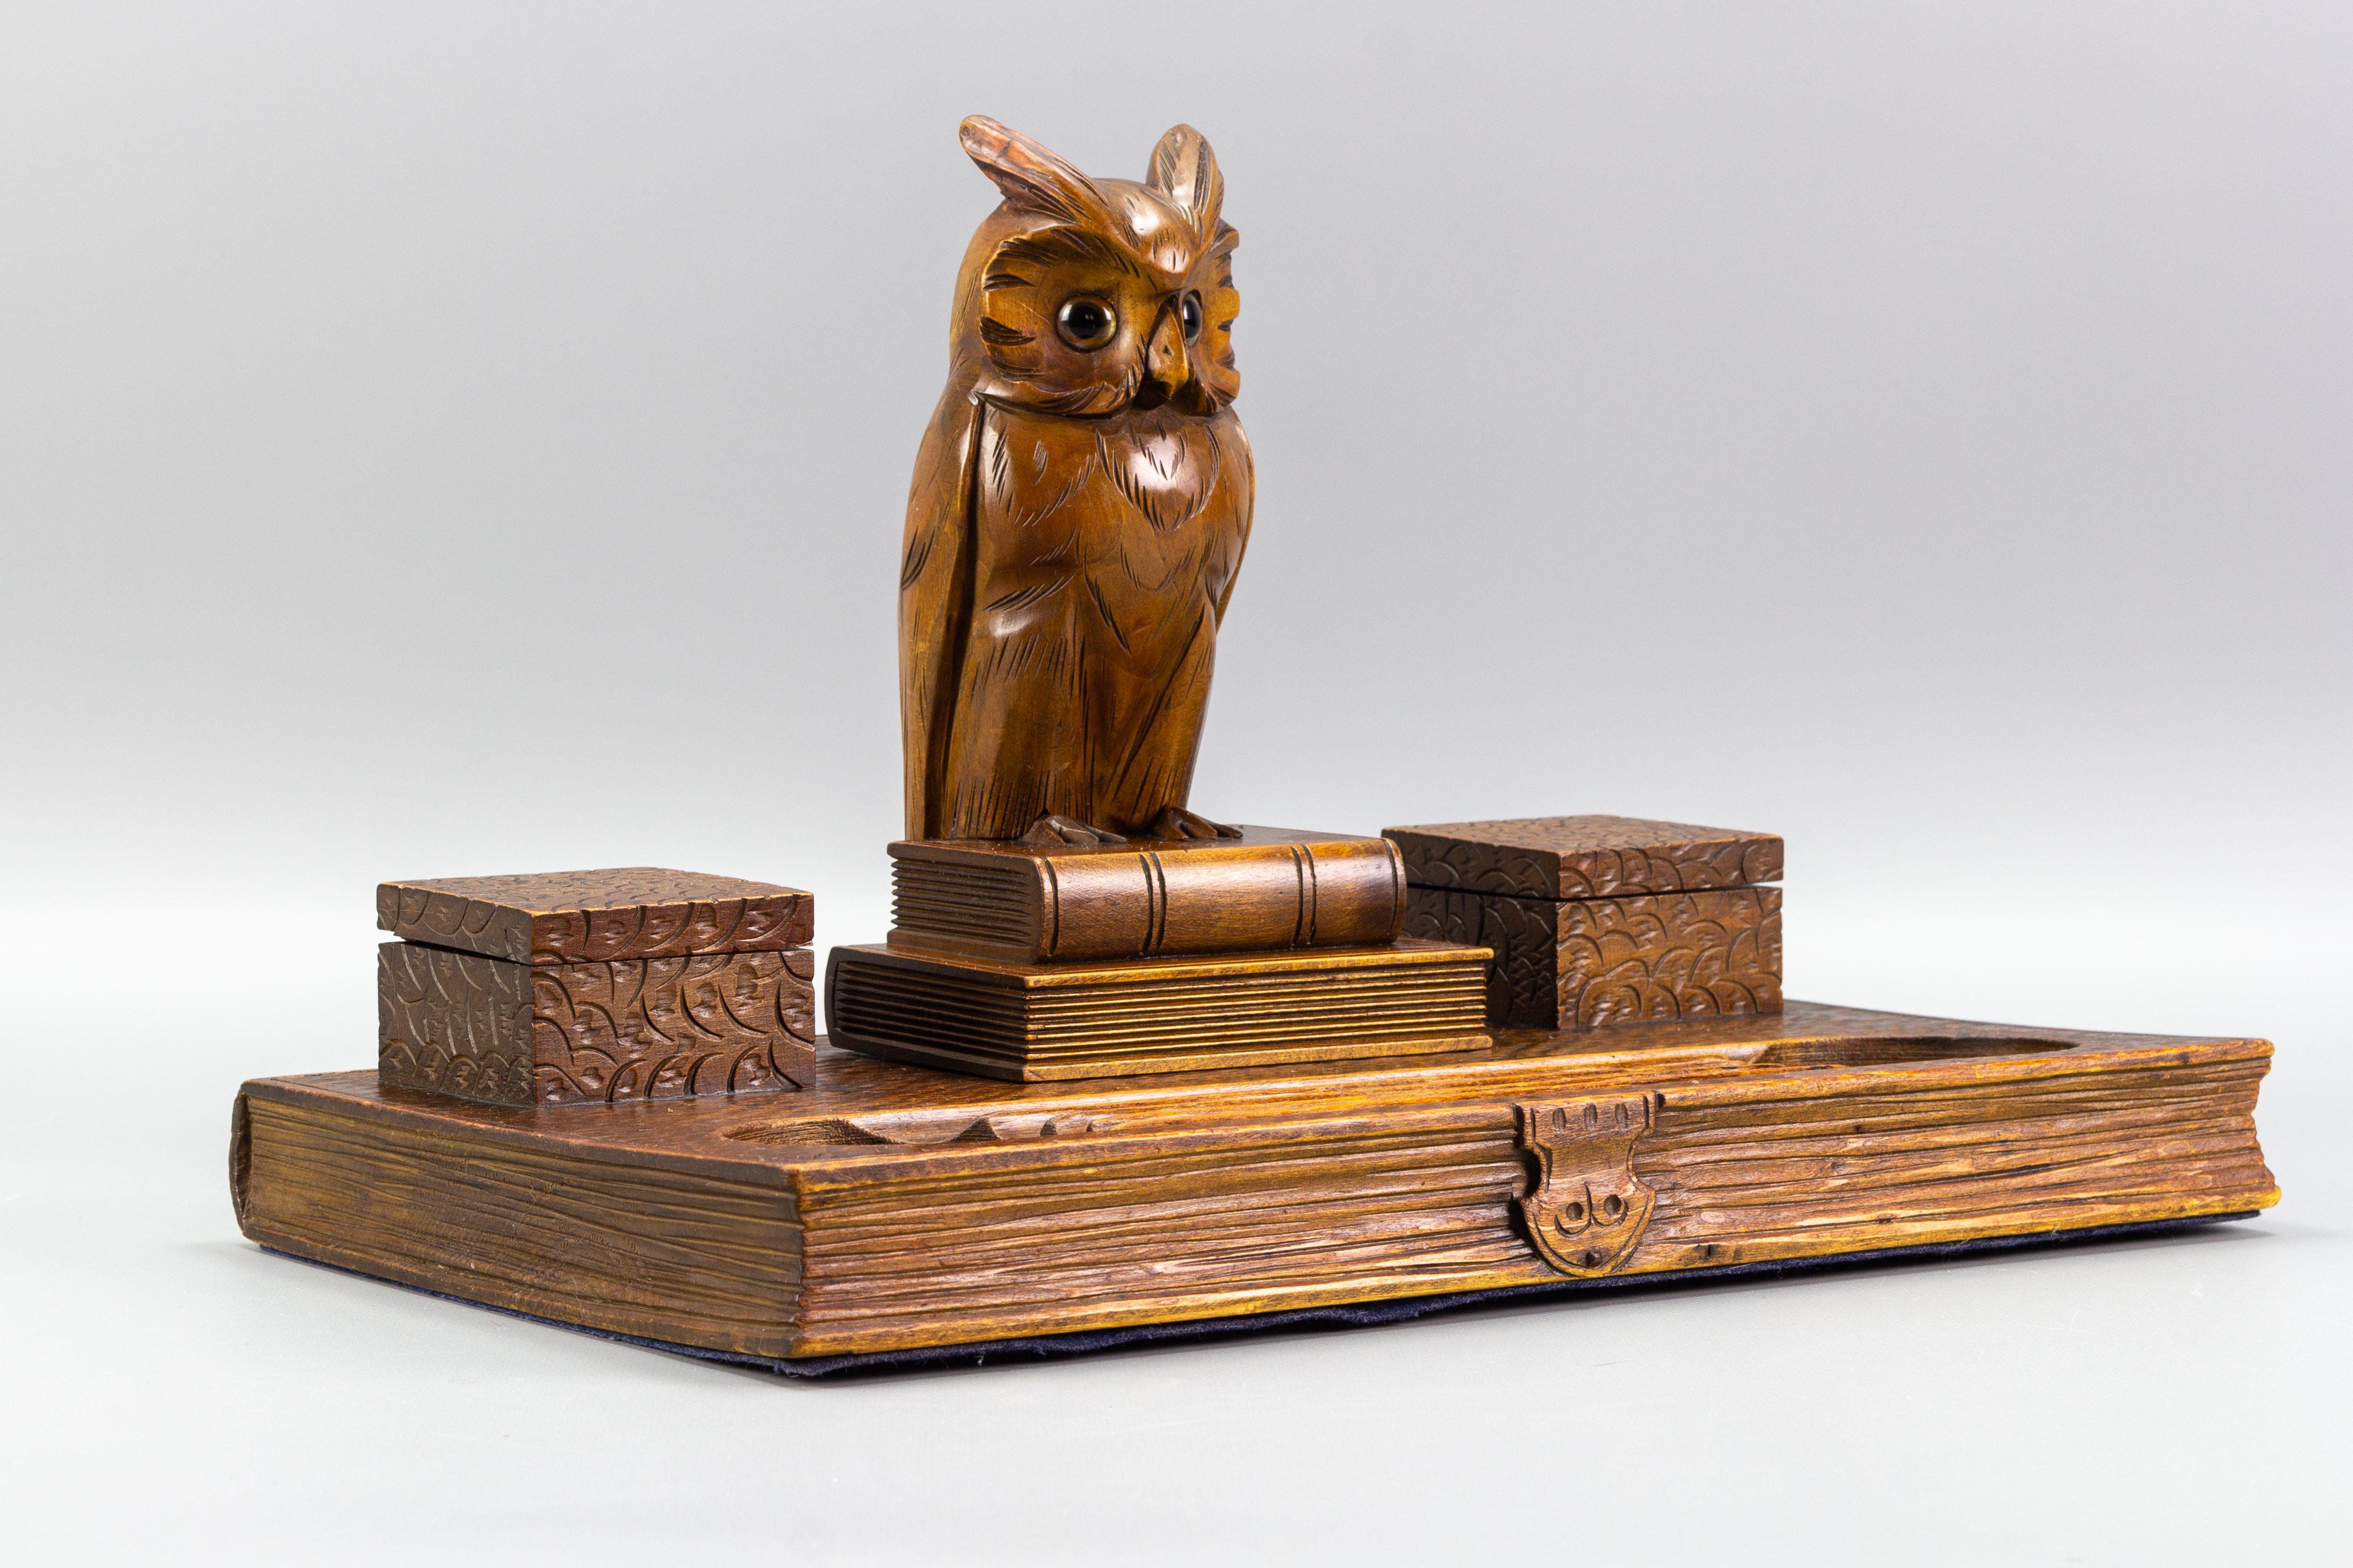 Beautiful Art Deco hand-carved wooden double inkwell in a shape of a book with a majestic owl figure sitting on two books. The inkwells contain the original white porcelain liners. The owl has glass eyes, and the Stand has trays for pens and